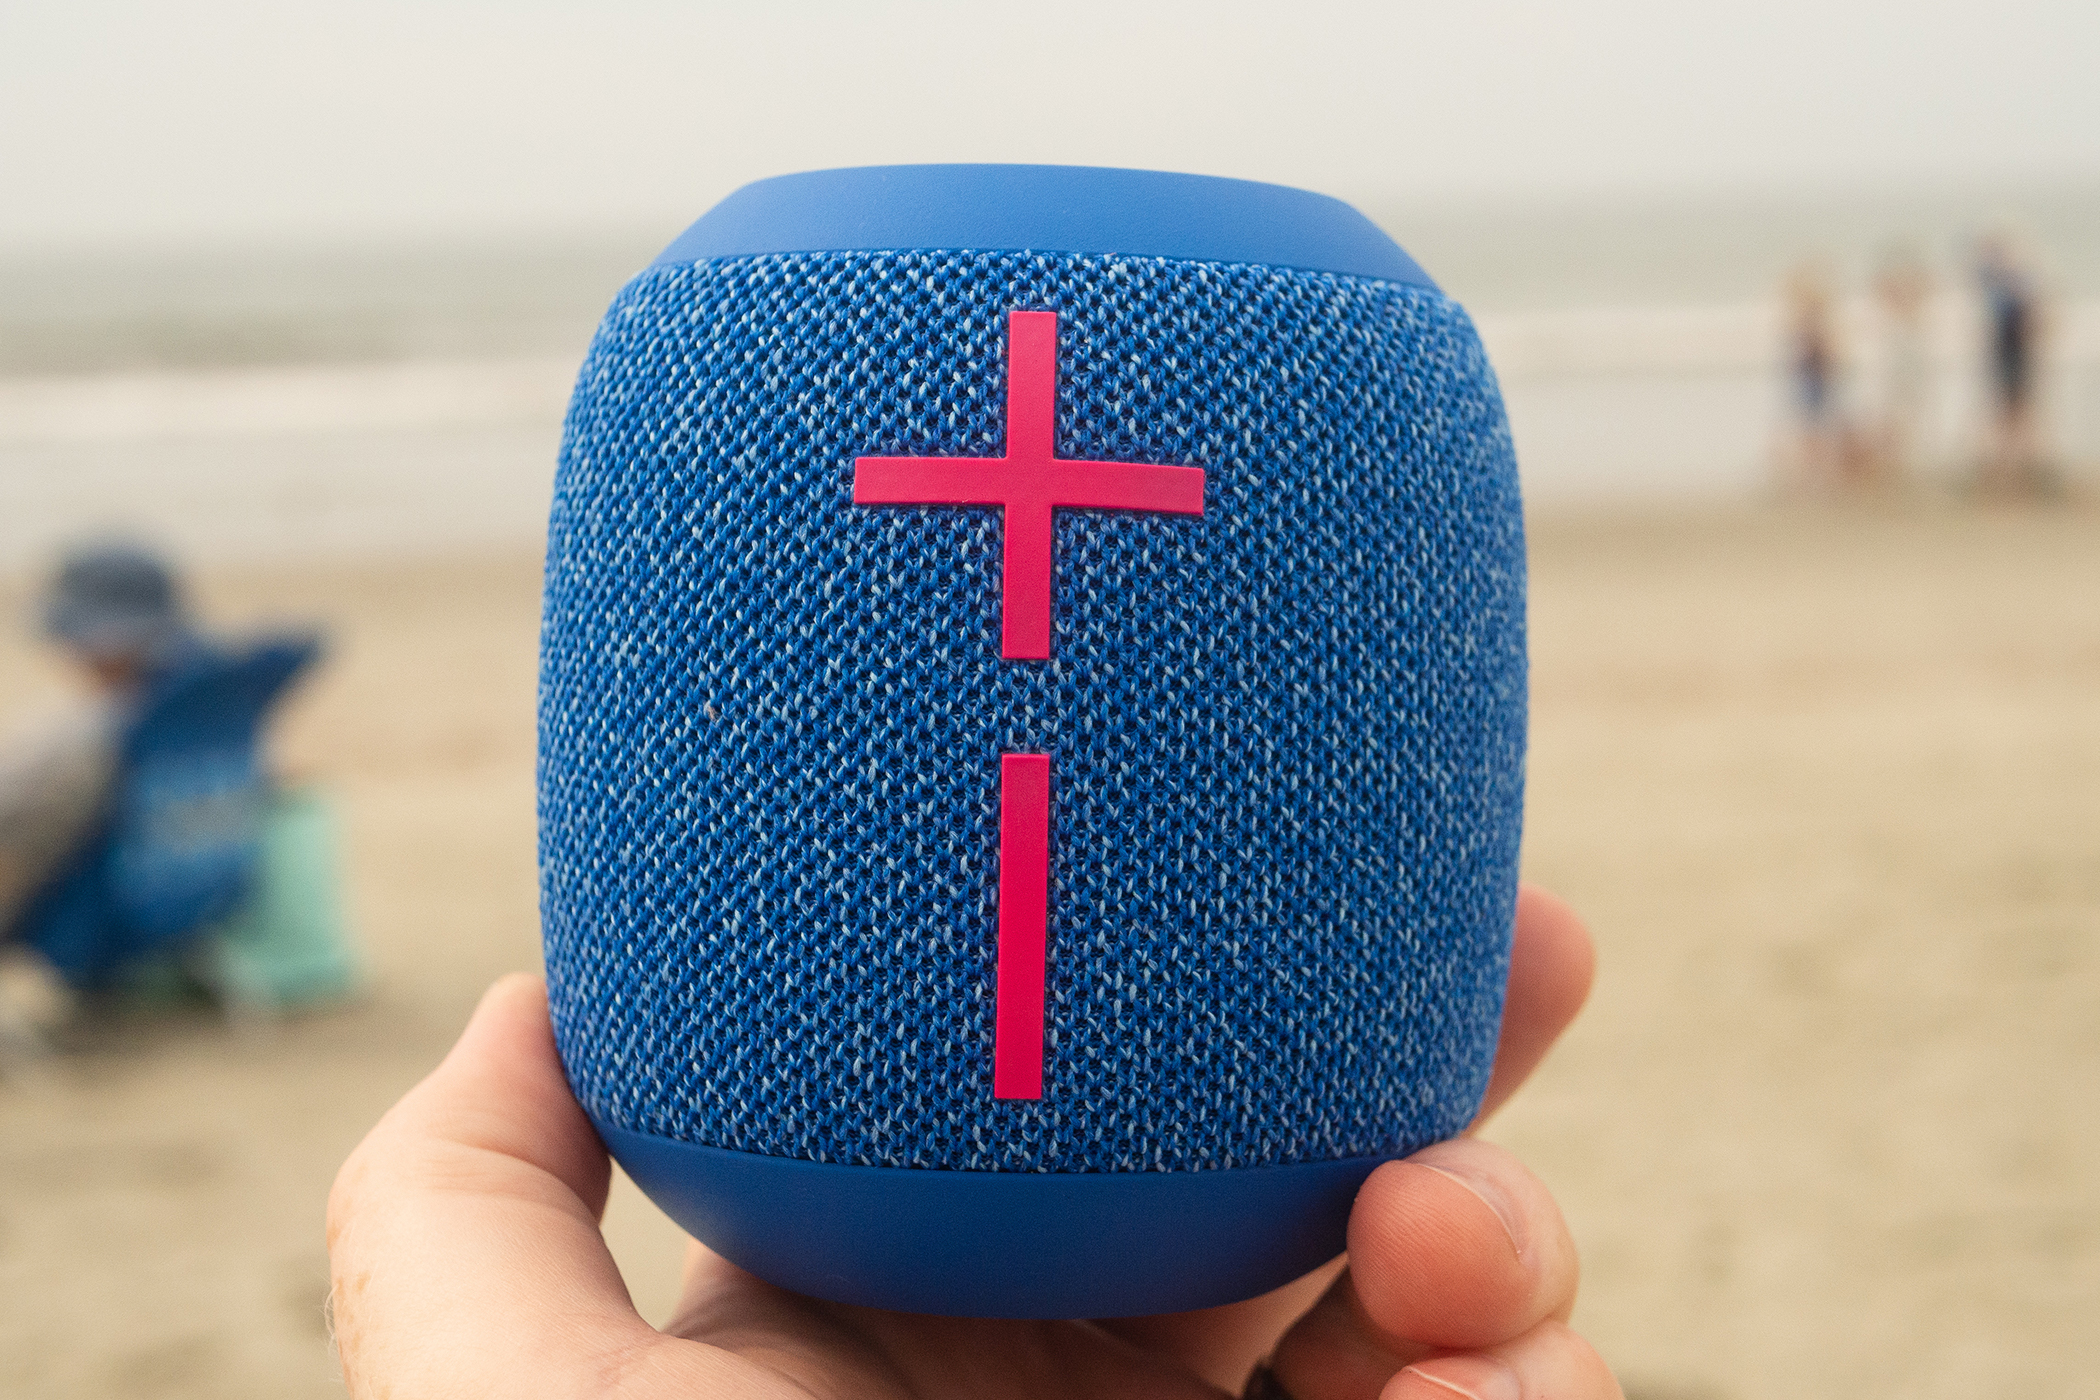 Ultimate Ears Wonderboom 3 Review: Third time the charm?